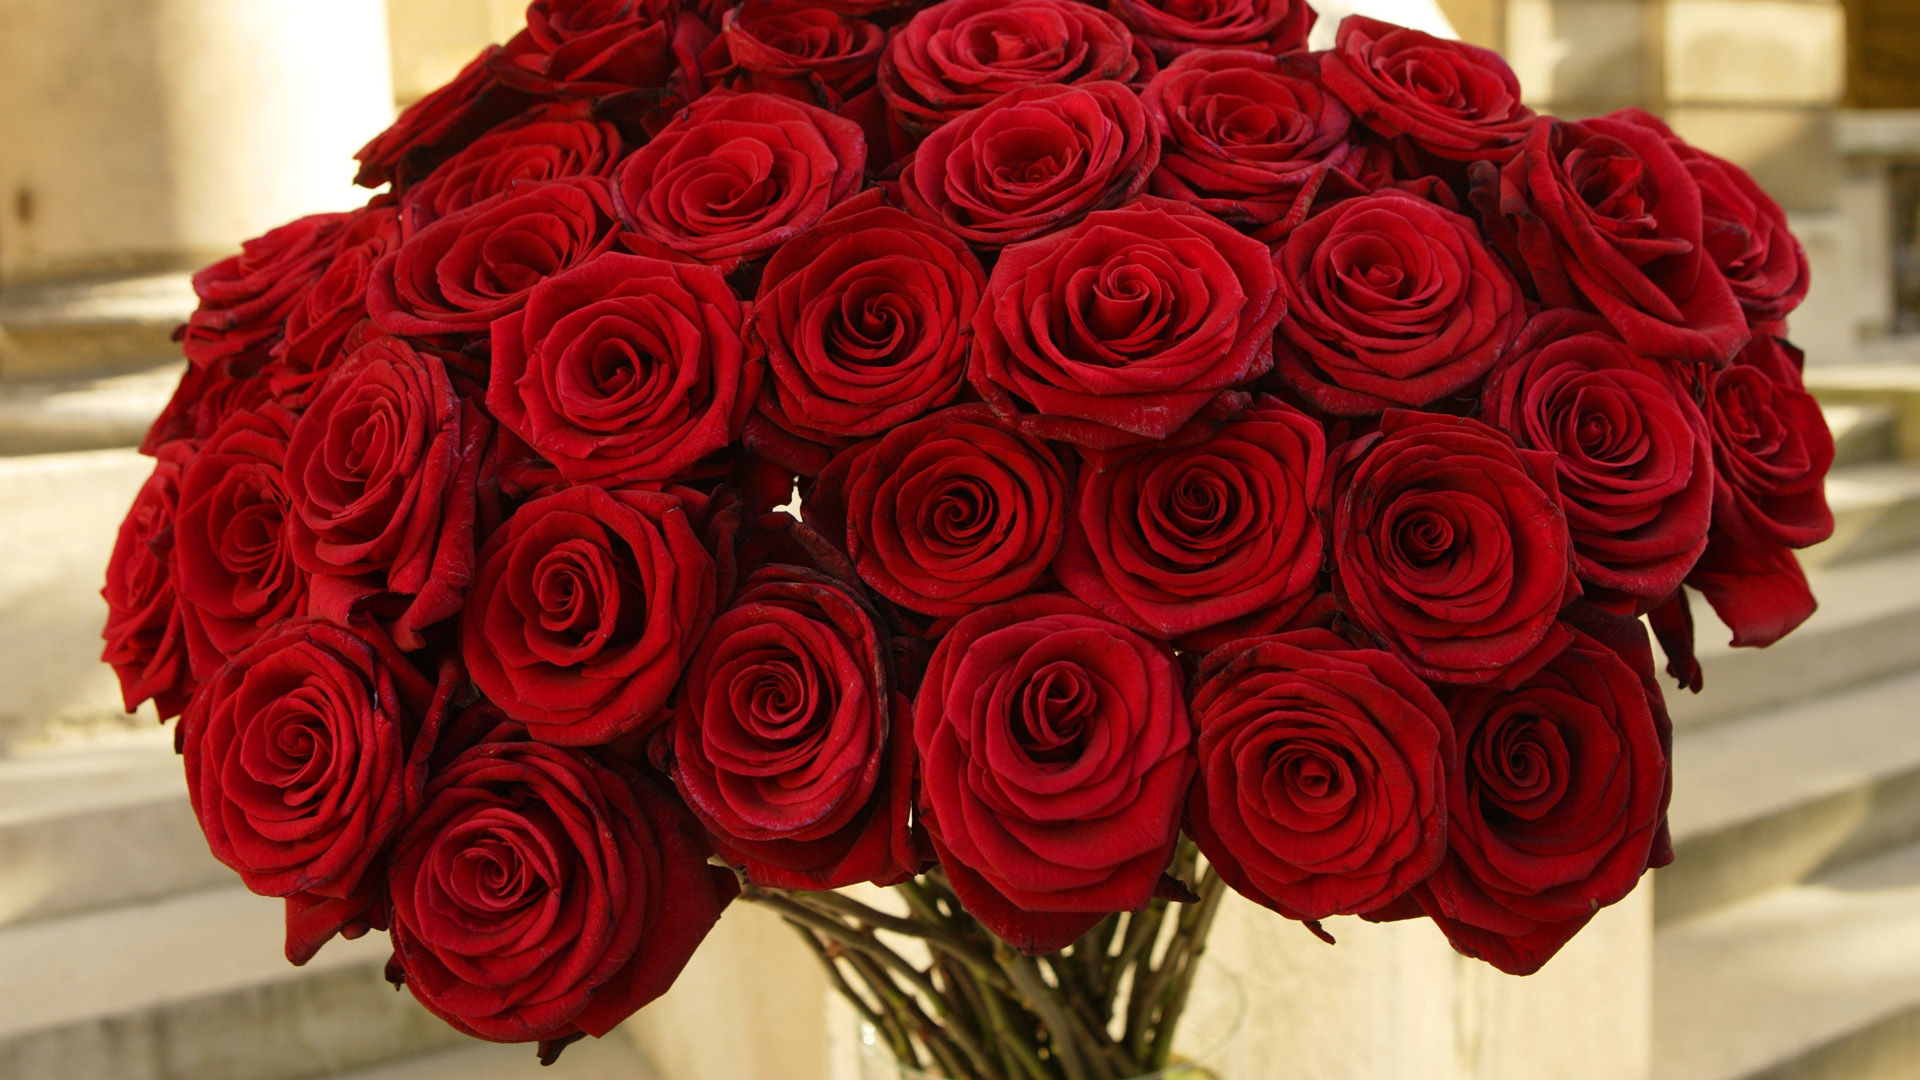 red rose images free download